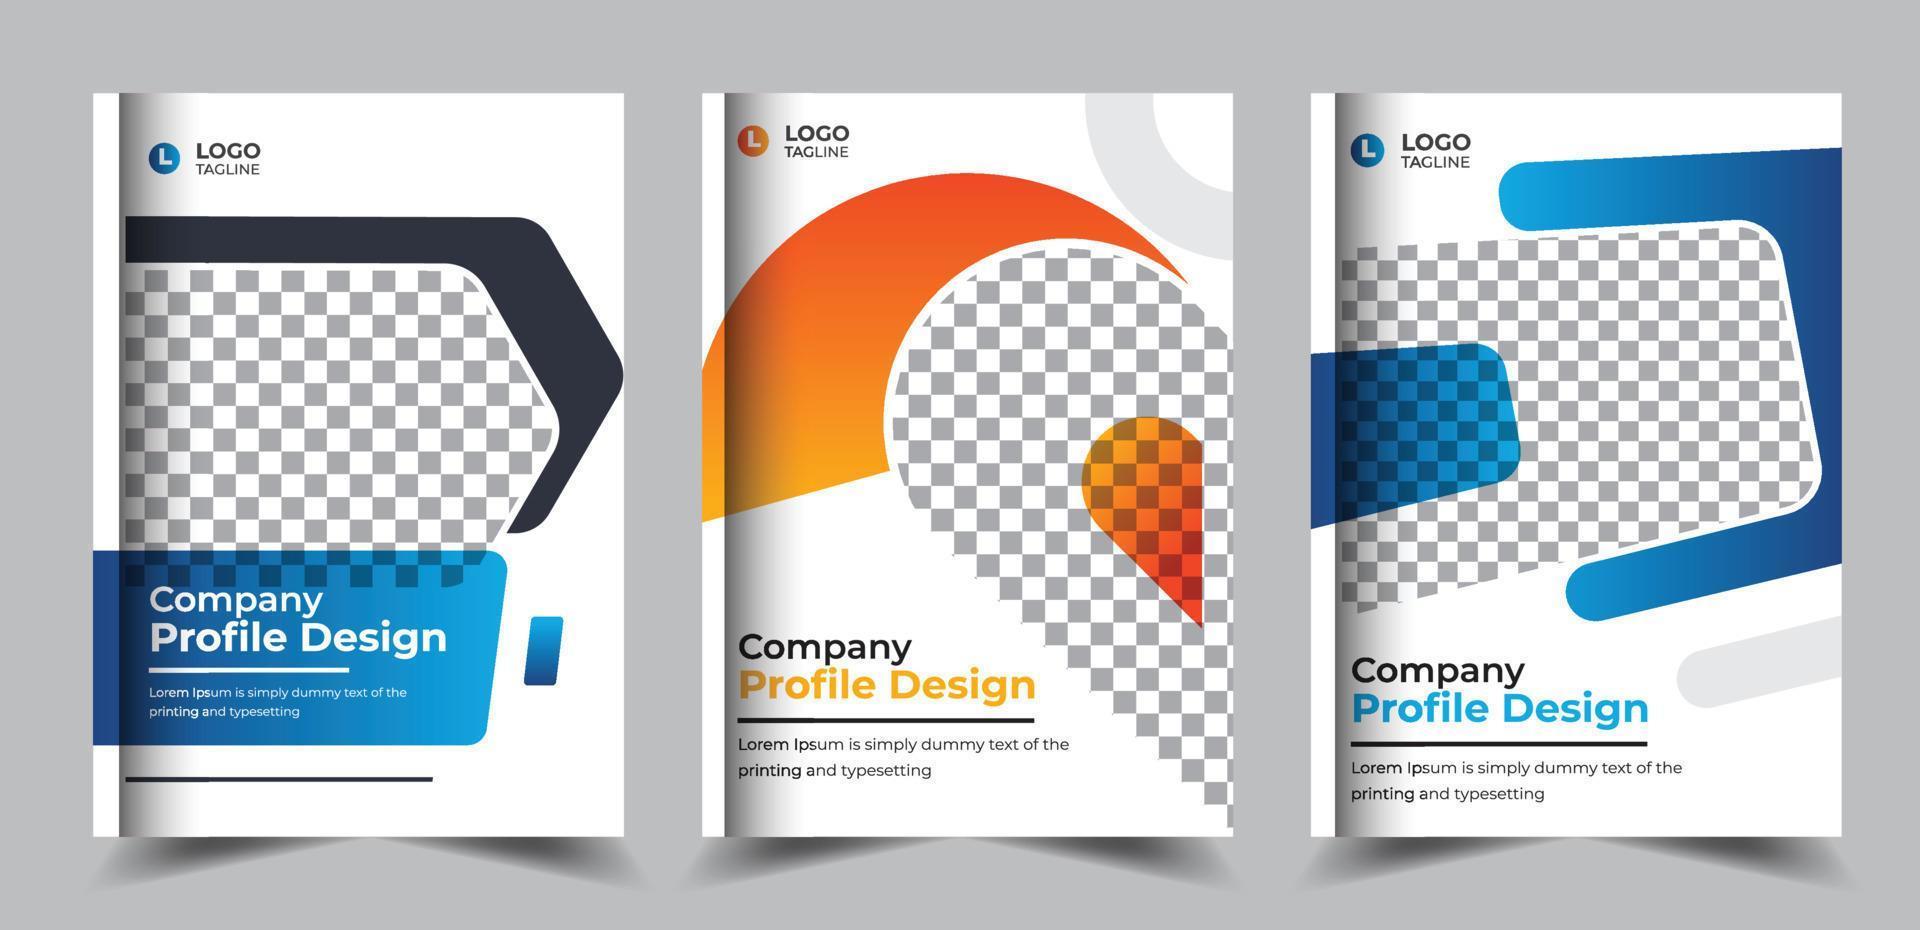 Company profile brochure with modern gradient shapes business book cover design vector